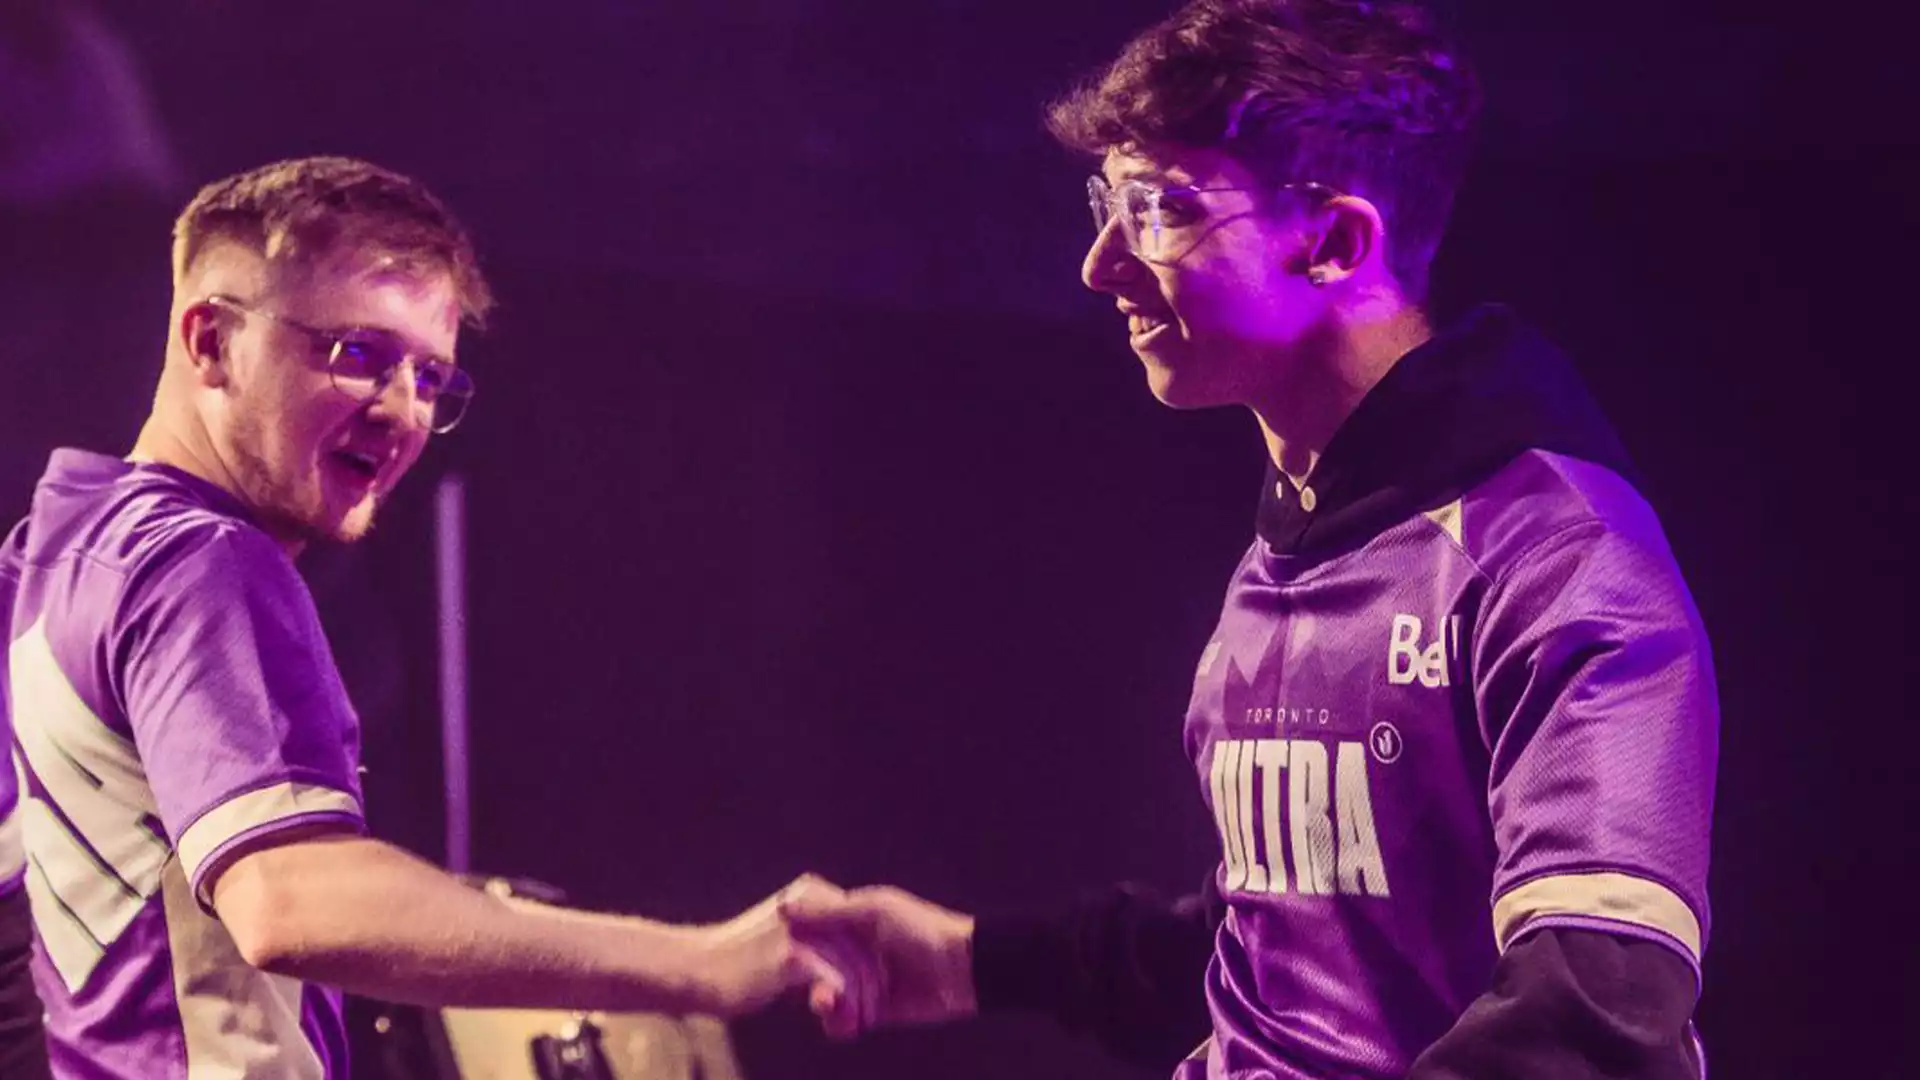 Hicksy: Becoming the first EU champ would be 'the highlight of my life'